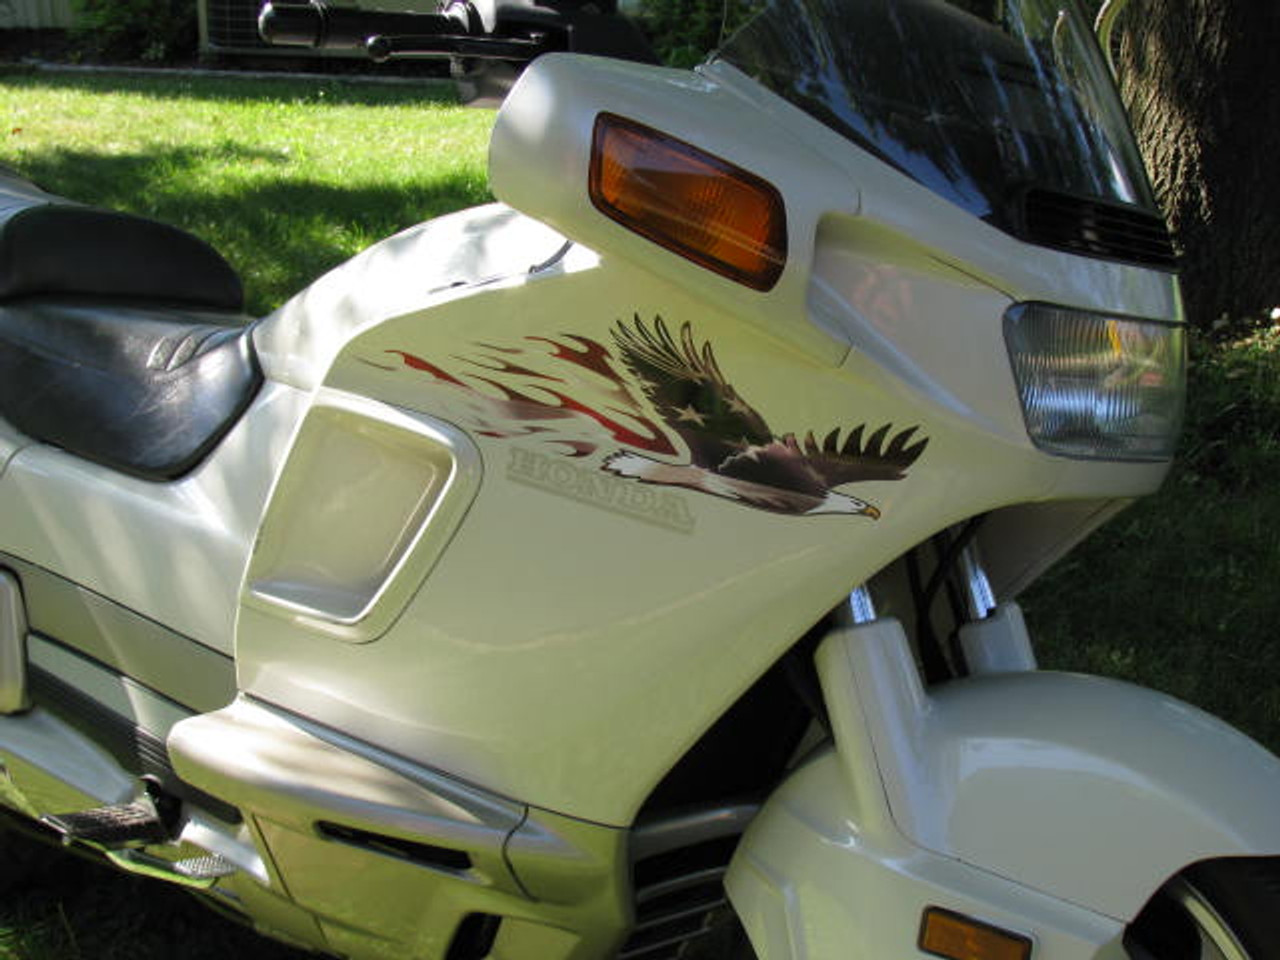 These Eagle decals can fit on your motorcycle too. Especially on saddlebags.